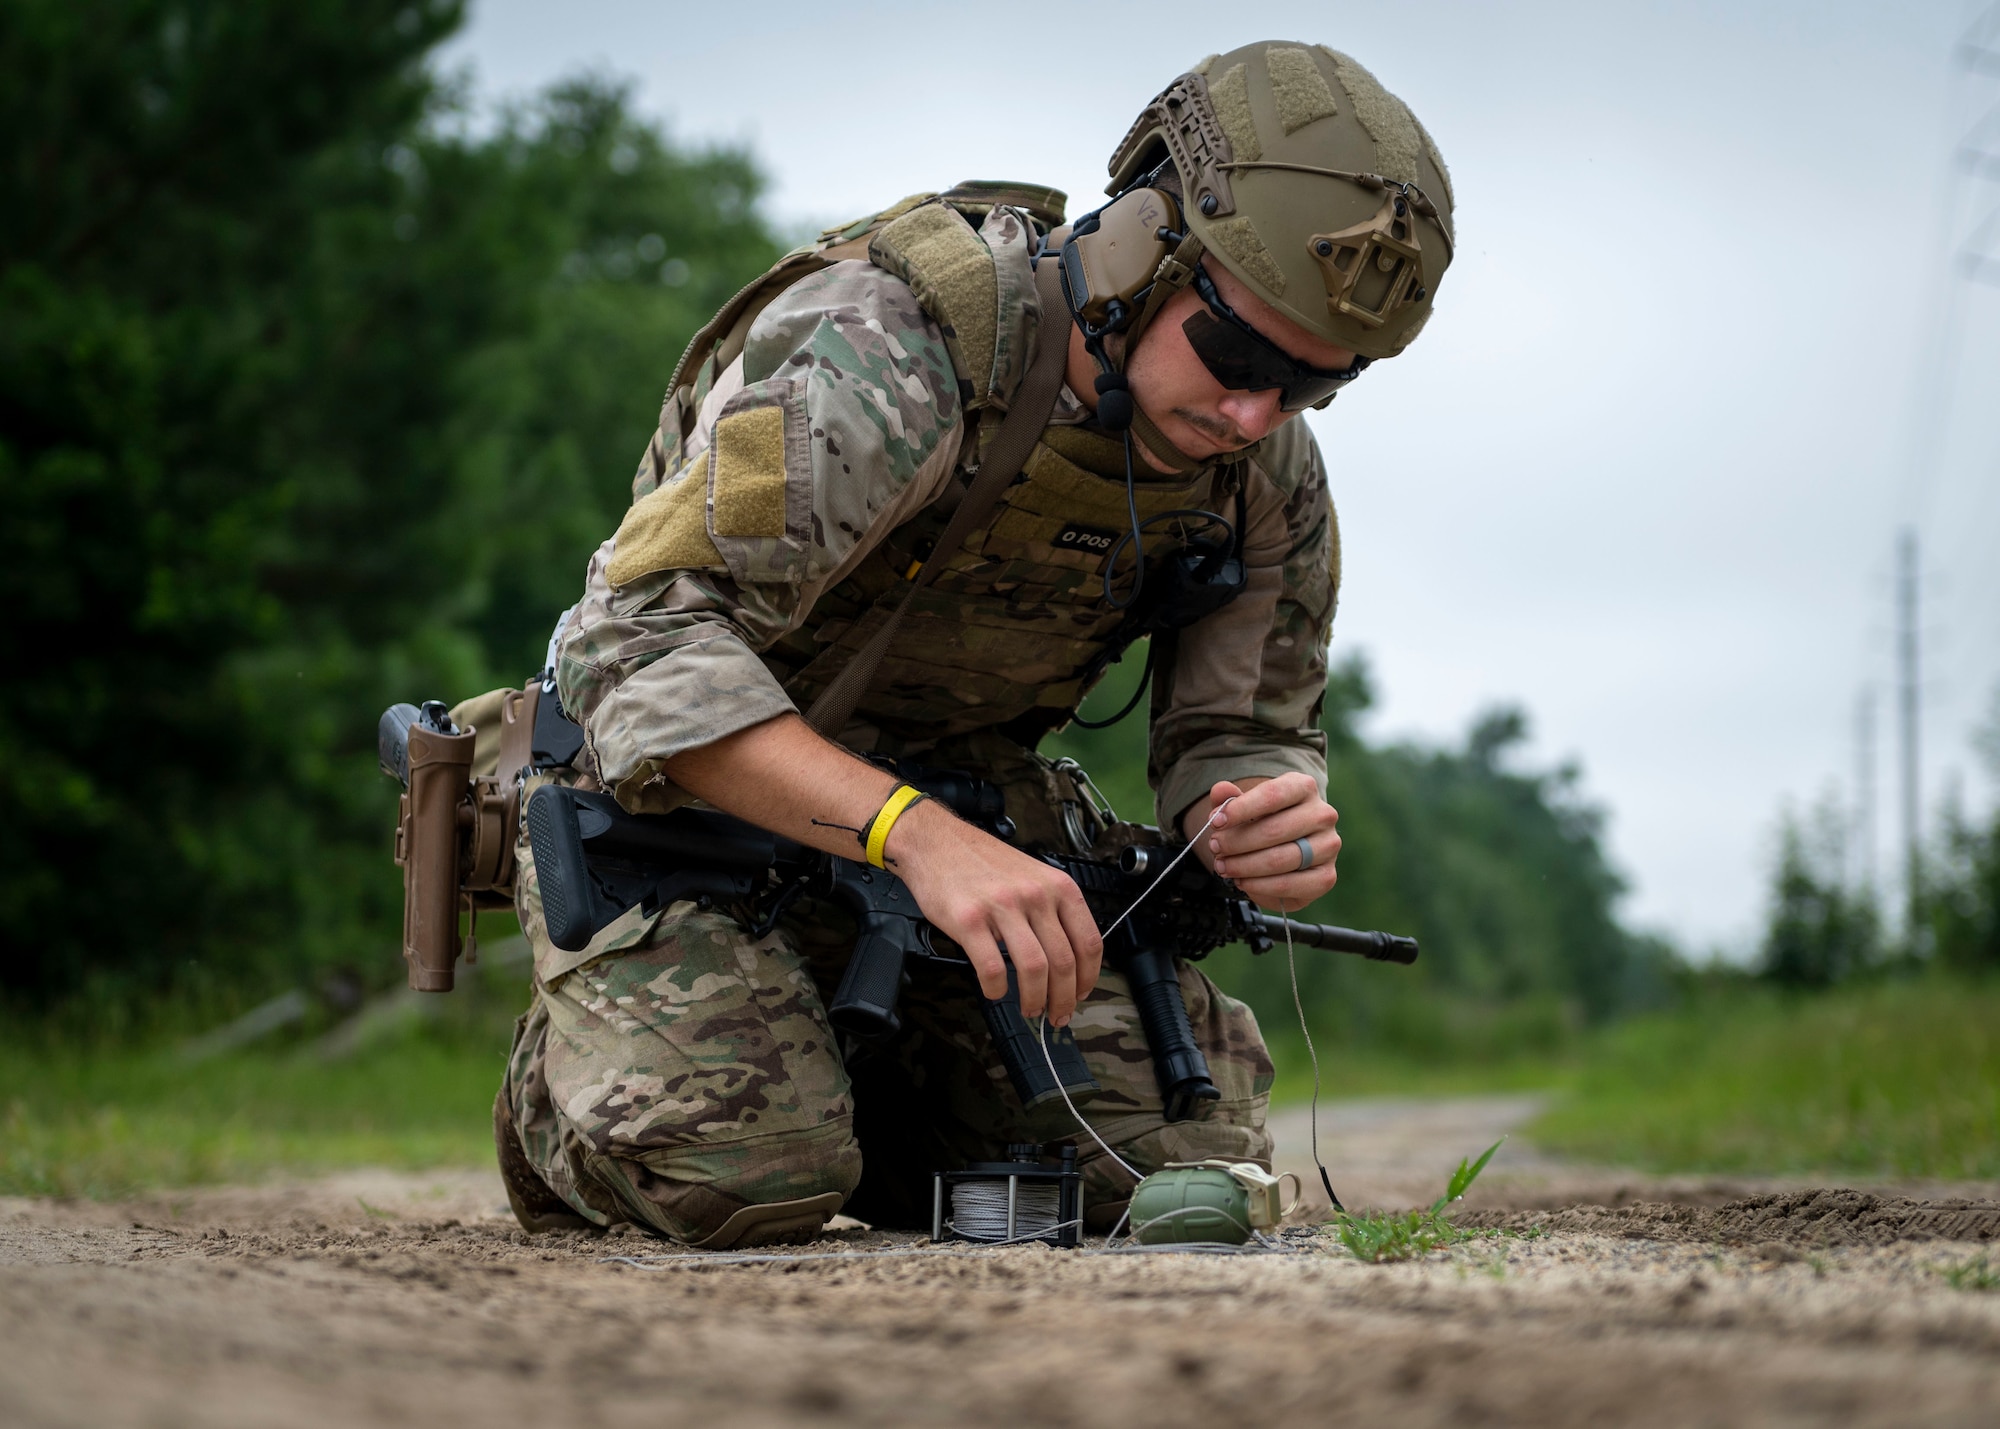 Airman 1st Class Braiden Bray, 4th Civil Engineer Squadron explosive ordnance disposal technician sets up a remote move on a dud-fired hand grenade during field training exercise Operation Guillotine at Seymour Johnson Air Force Base, North Carolina, July 27, 2021.